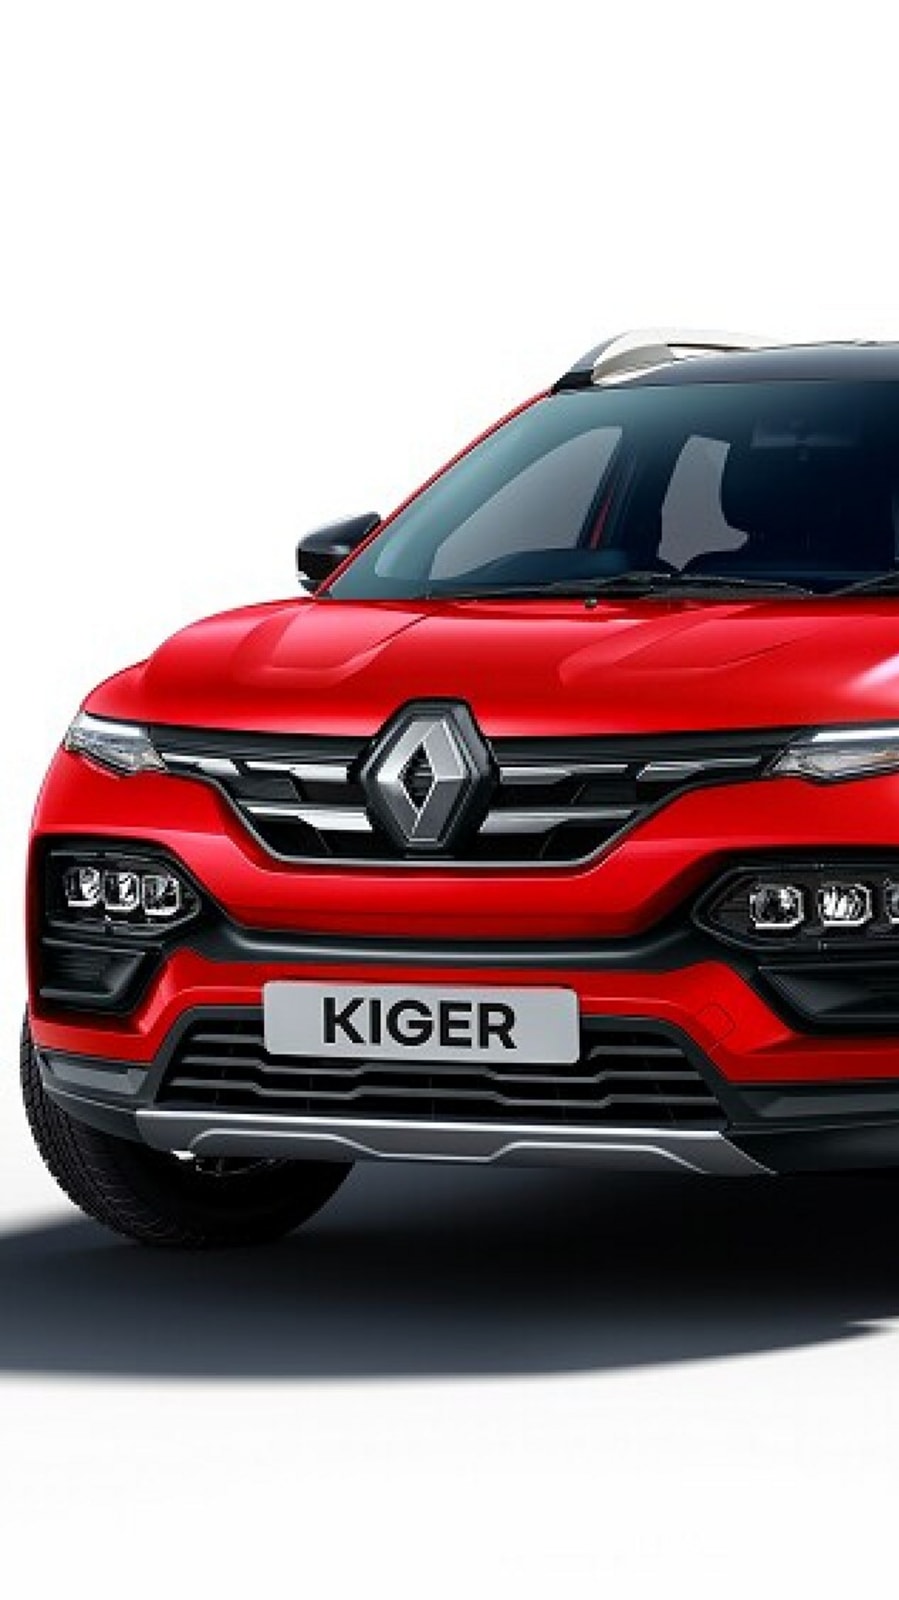 Price slash! Renault Kiger SUV offers more for less now